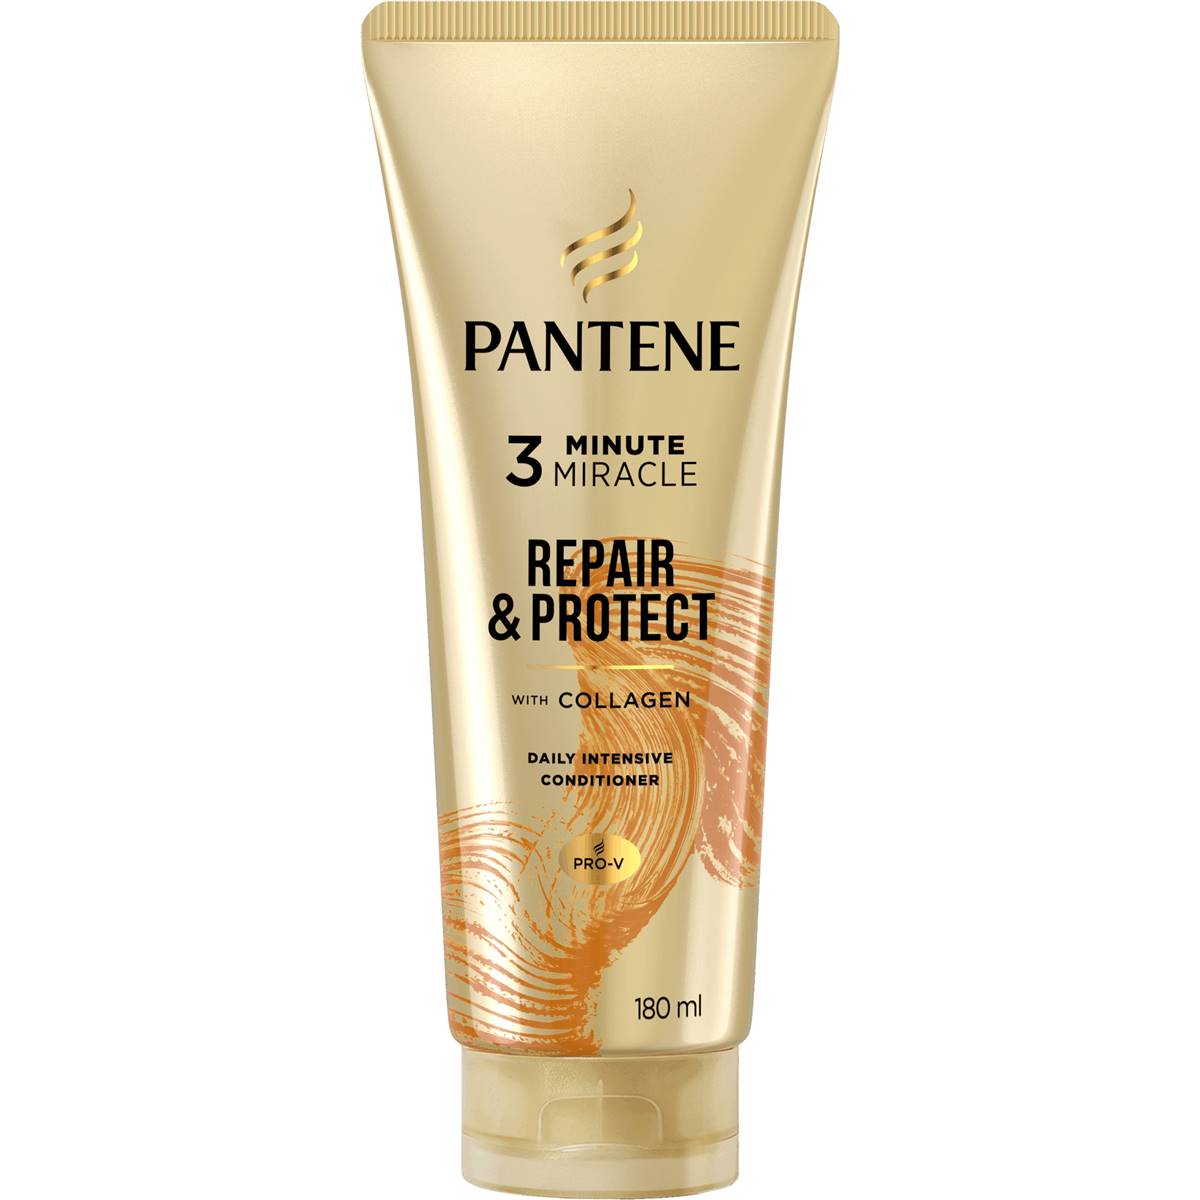 Pantene 3 Minute Miracle Conditioner Renew & Protect